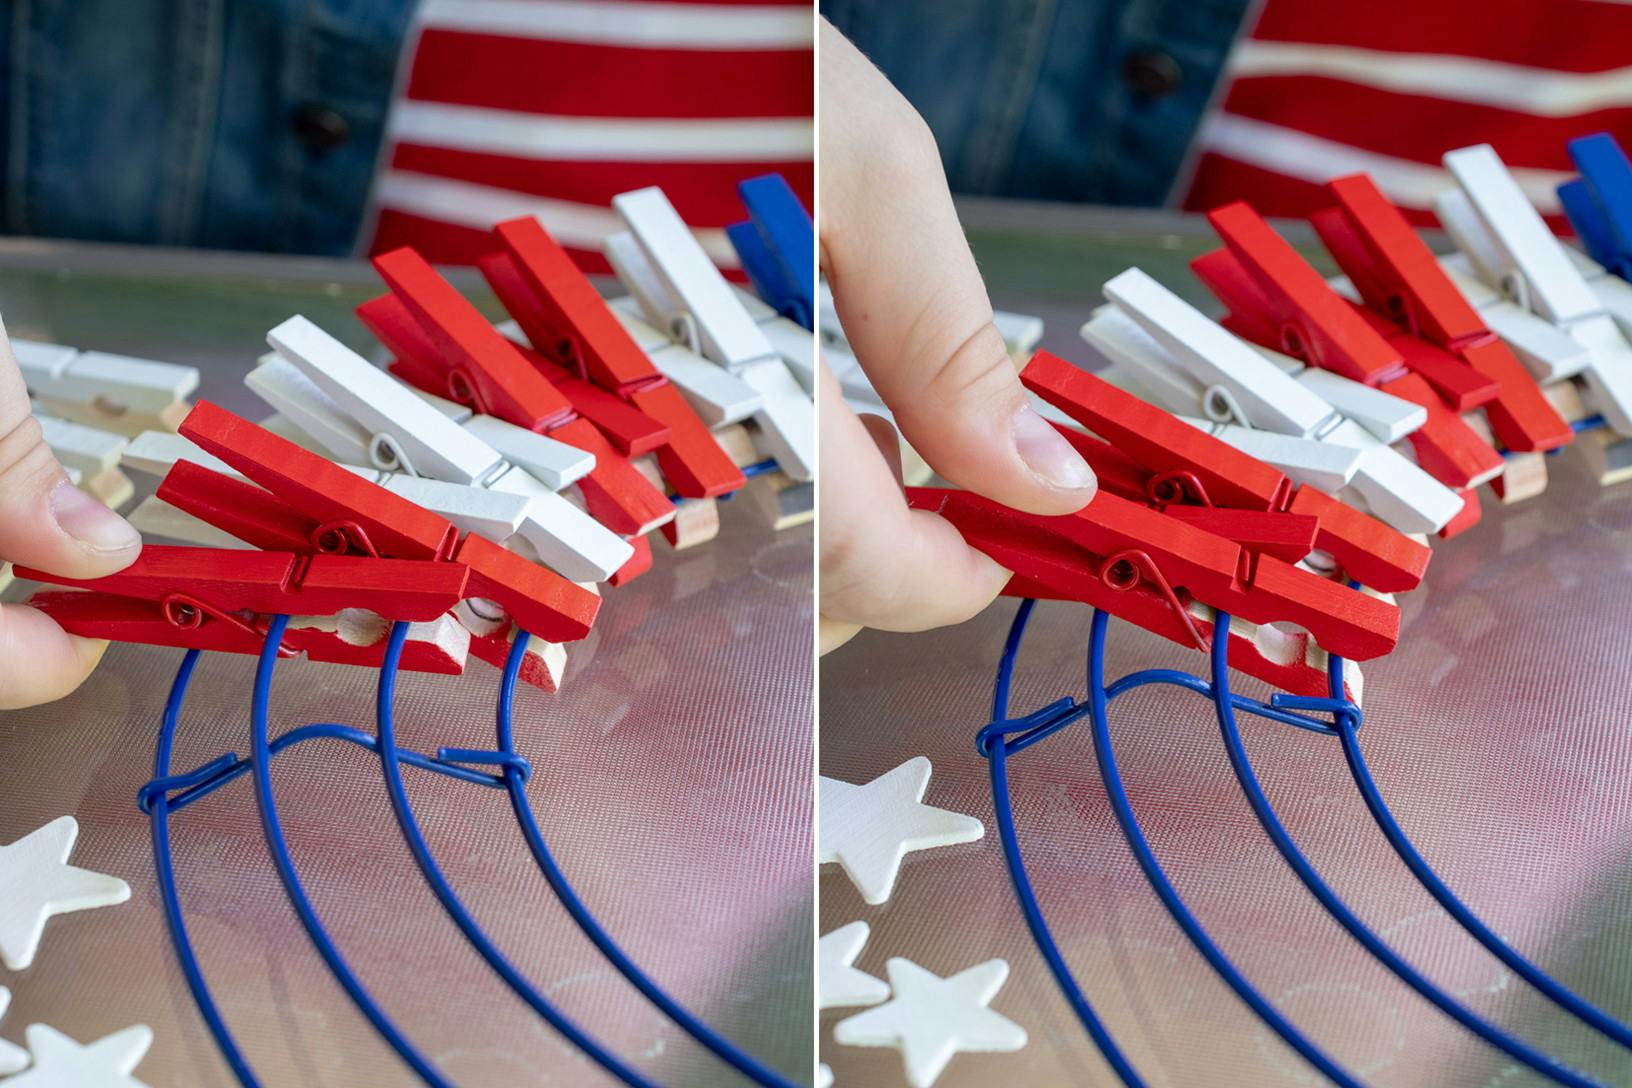 A person clipping the painted clothespins to a wreath frame in a red, white, and blue pattern.